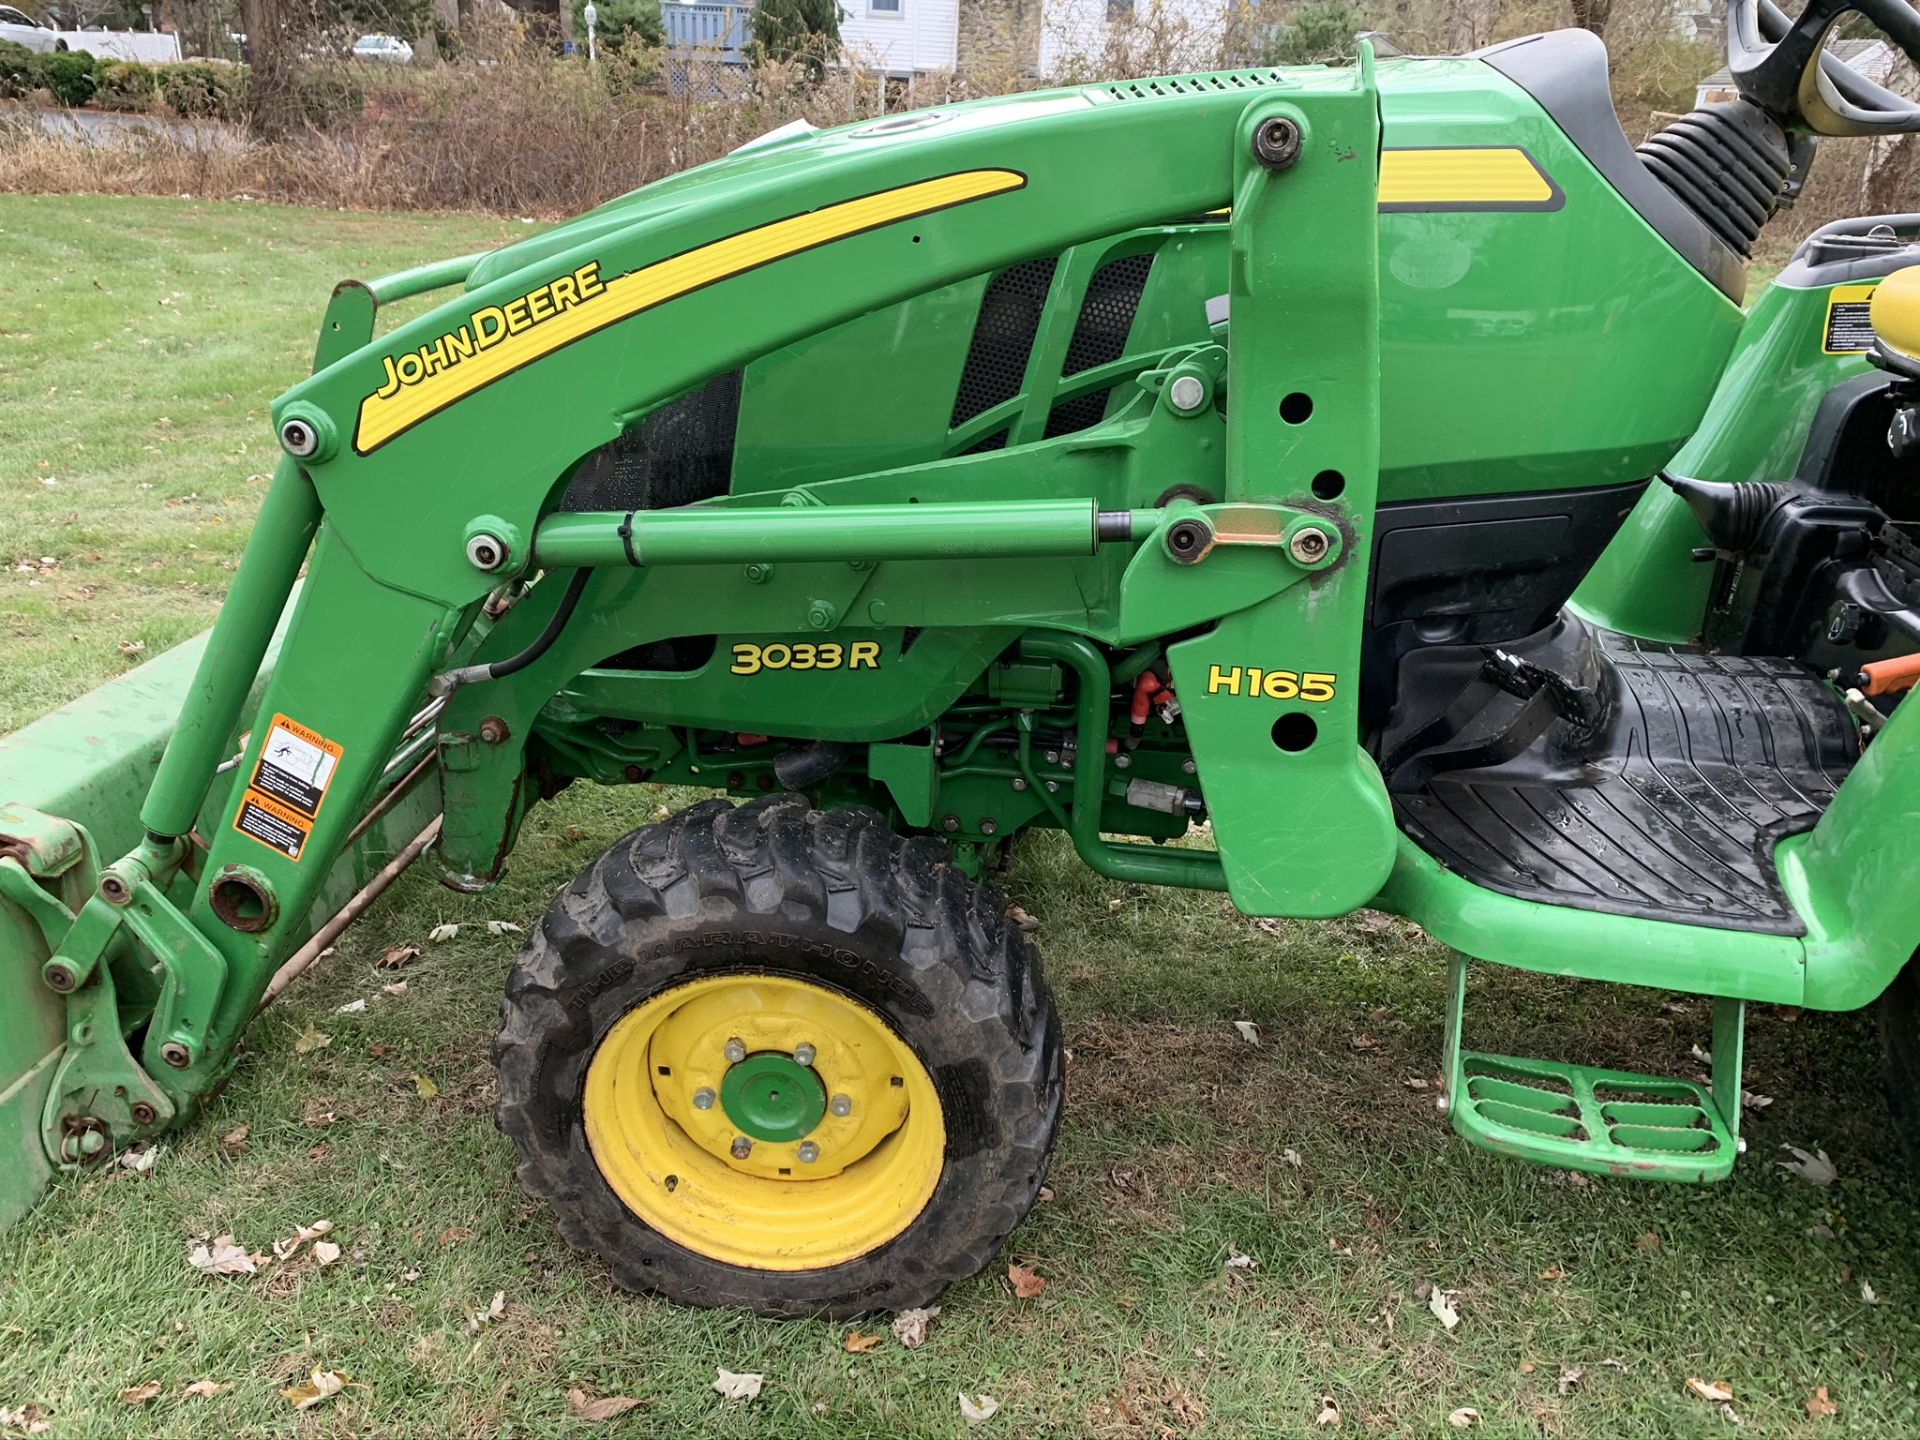 2014 John Deere 3033R Tractor w/ H1G5 Front Bucket, Rear Counter Weight, 309 Hours - Image 4 of 15